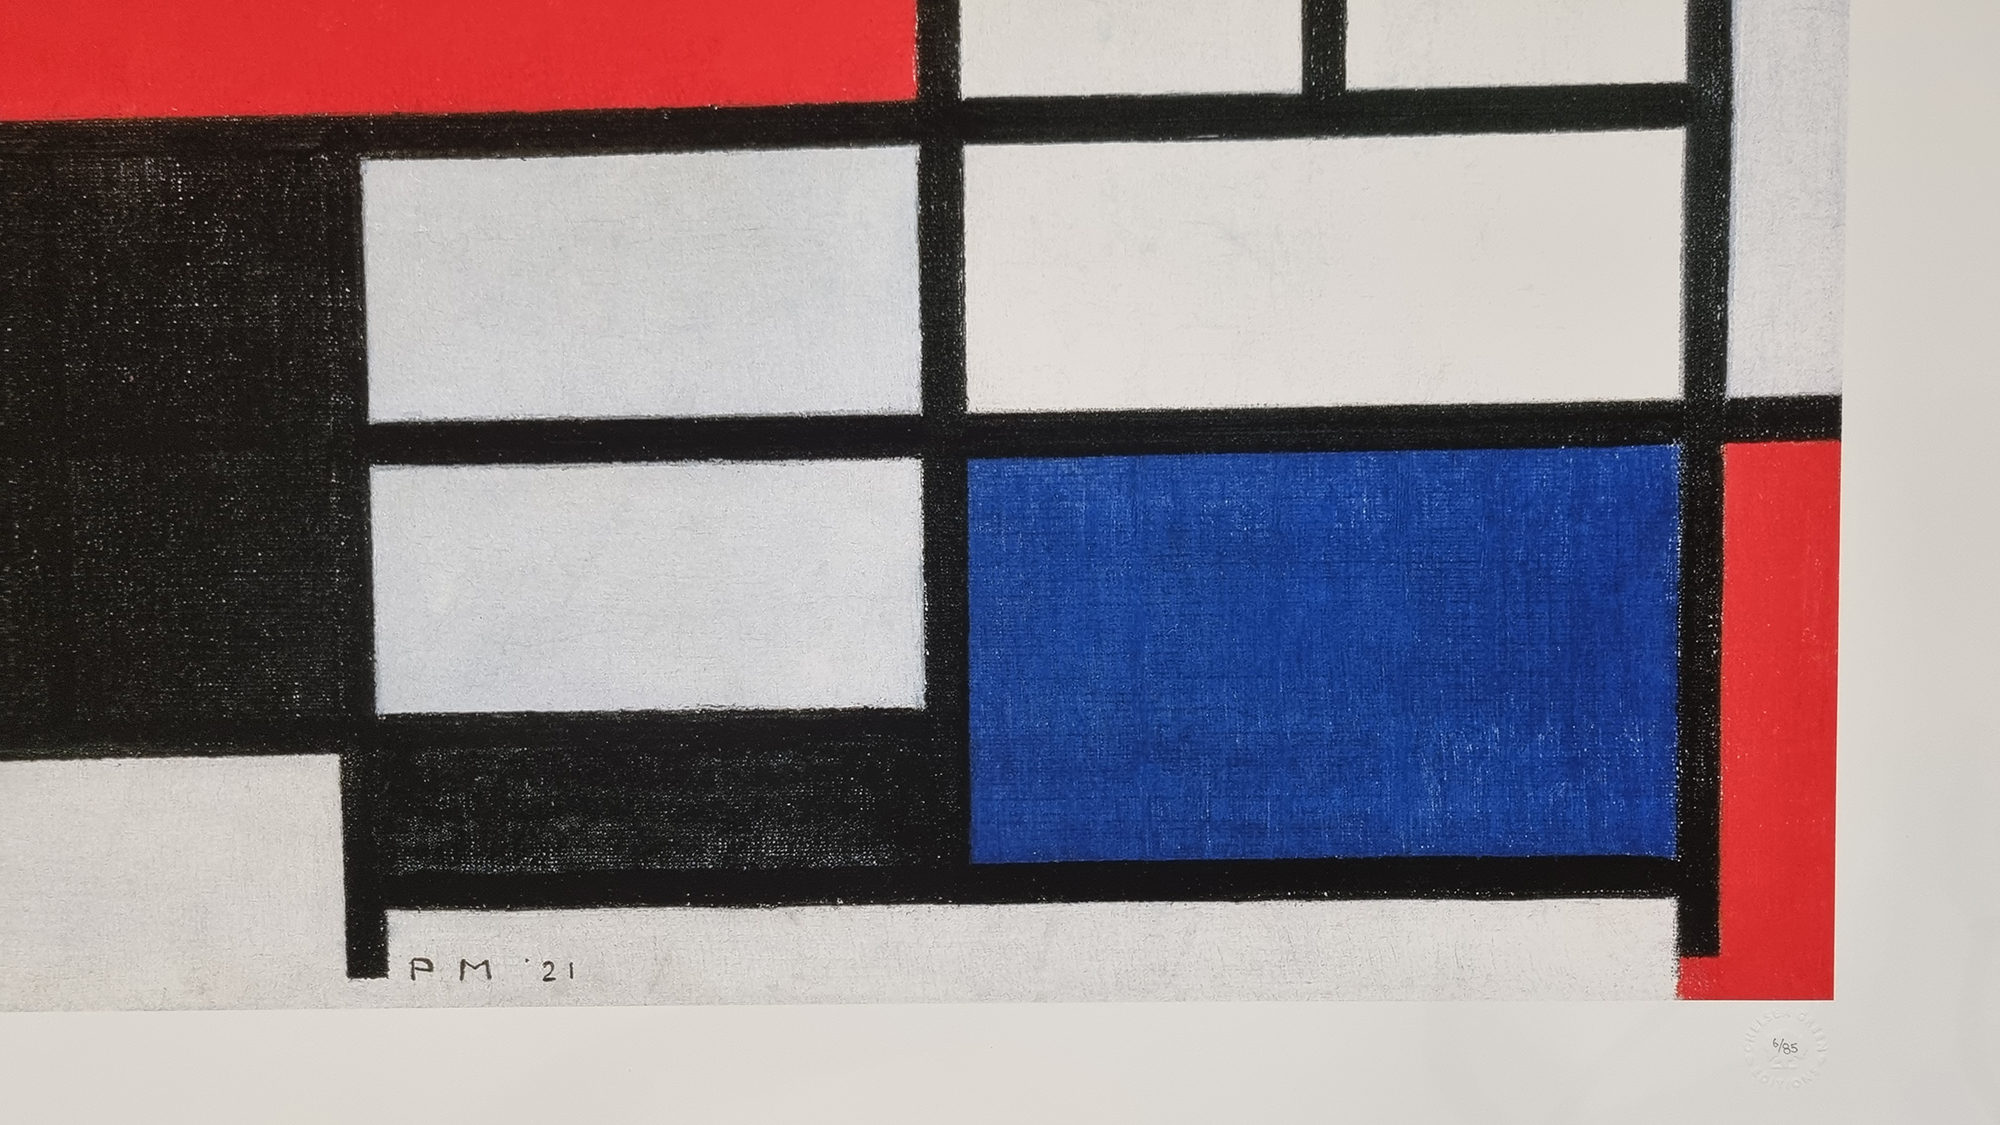 Piet Mondrian Rare Limited Edition. One of 85 only from the Composition Series - Image 6 of 8